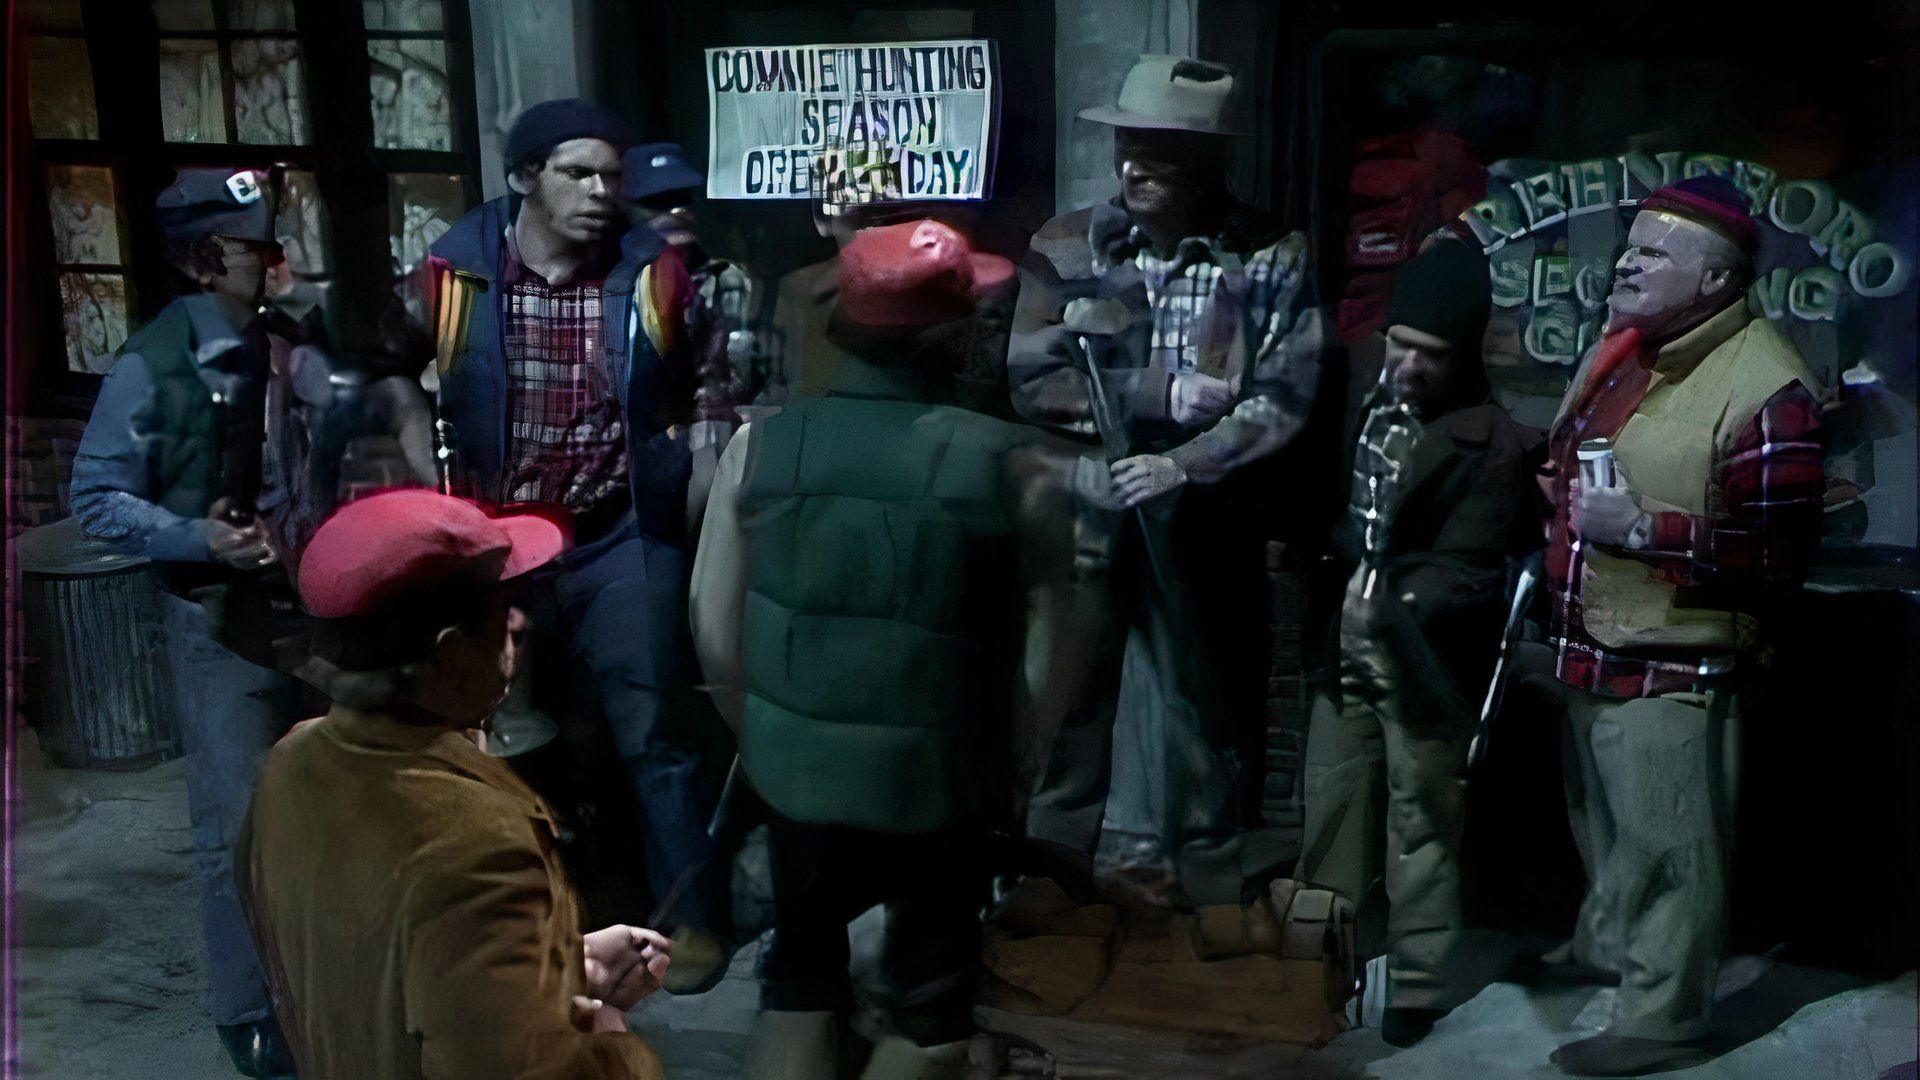 a bunch of hunters gather in the sketch commie hunting season of saturday night live